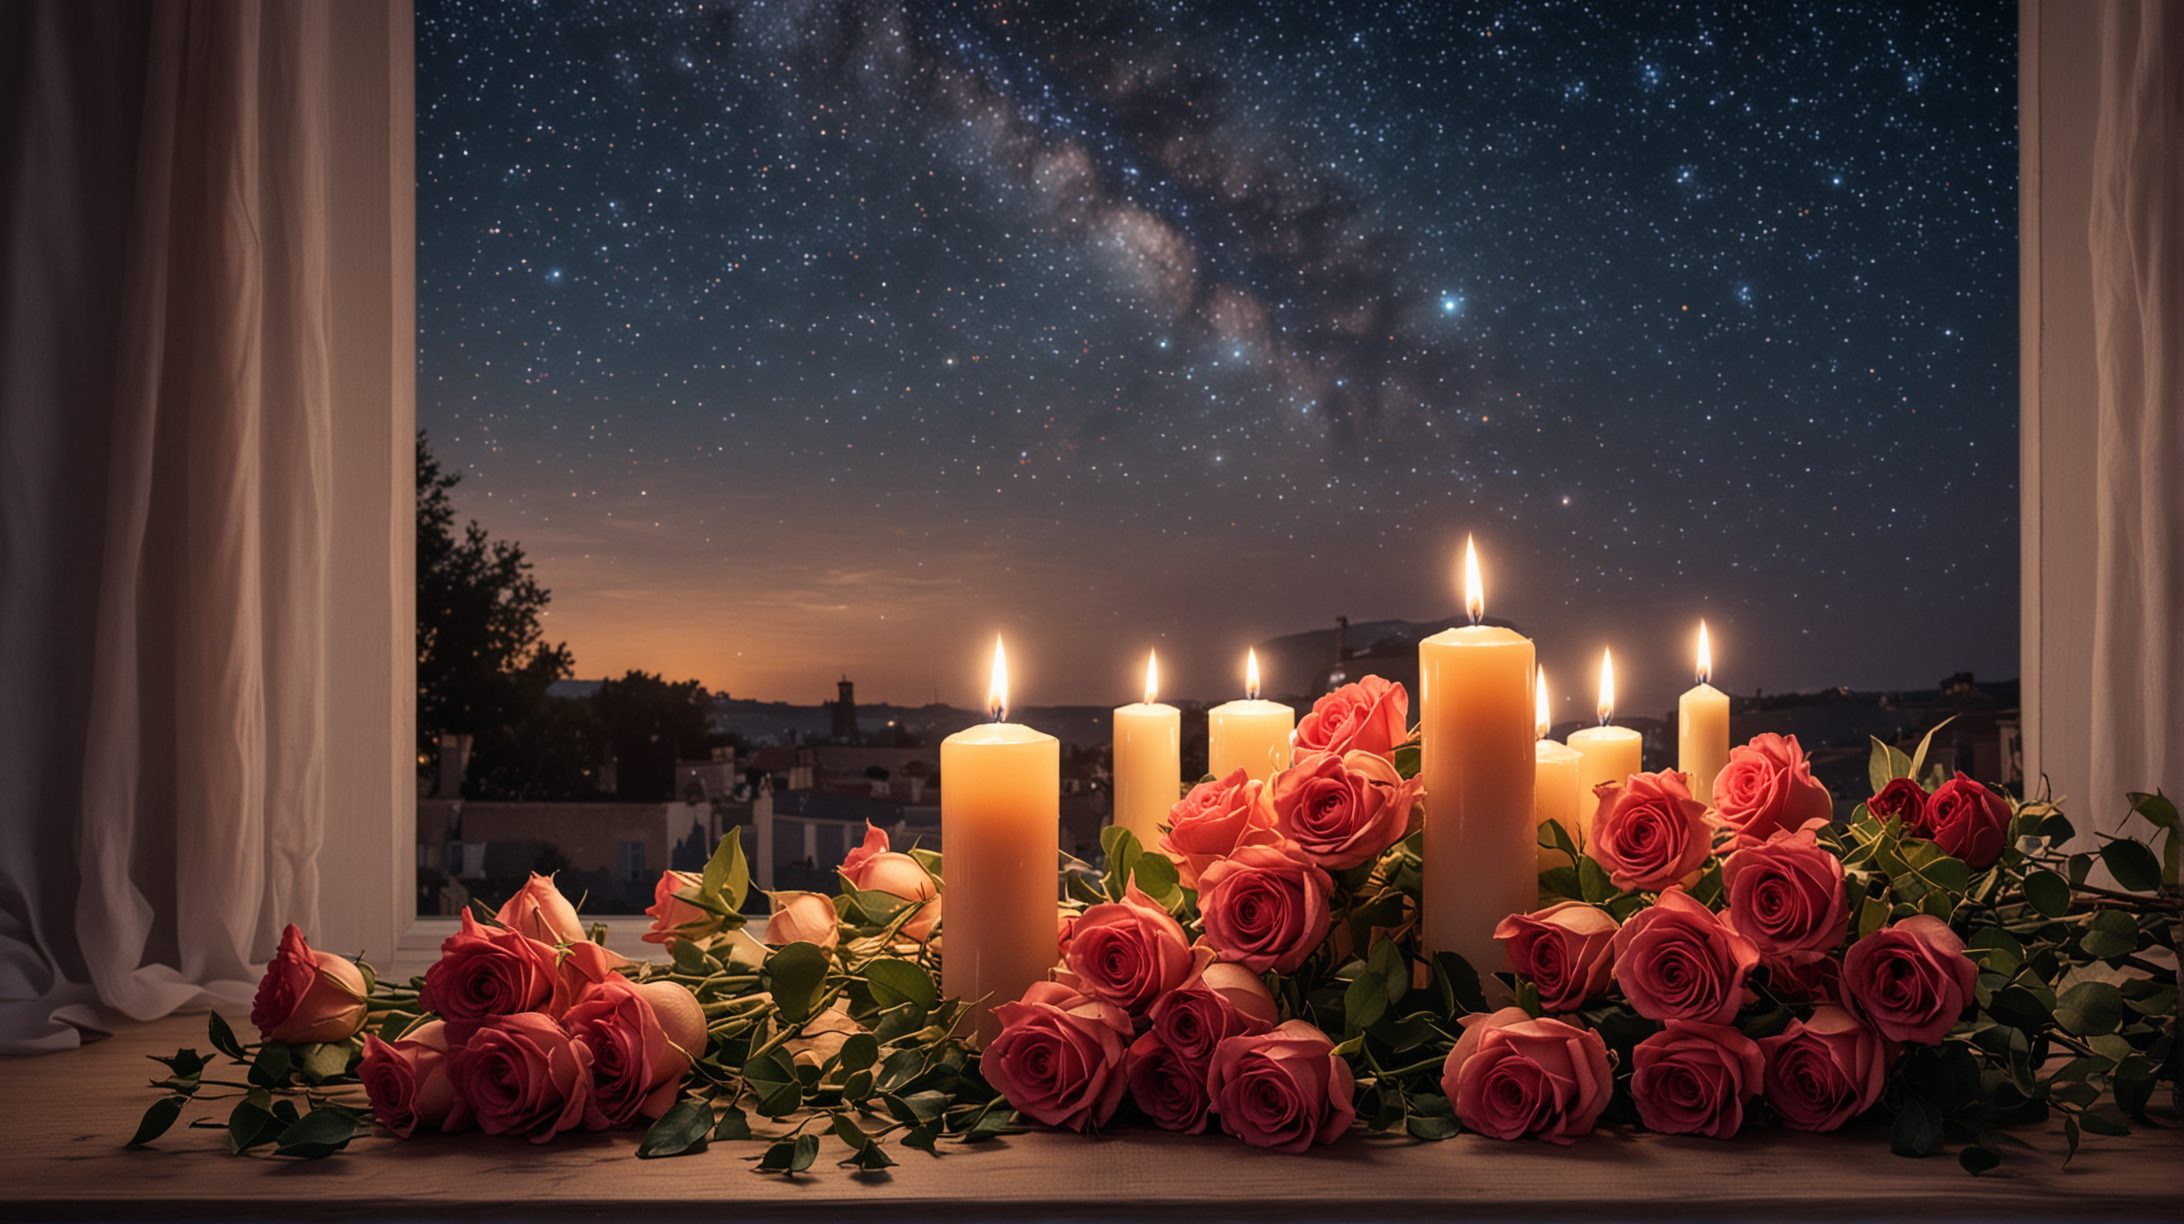 Romantic Evening Scene with Starry Sky Candles and Roses